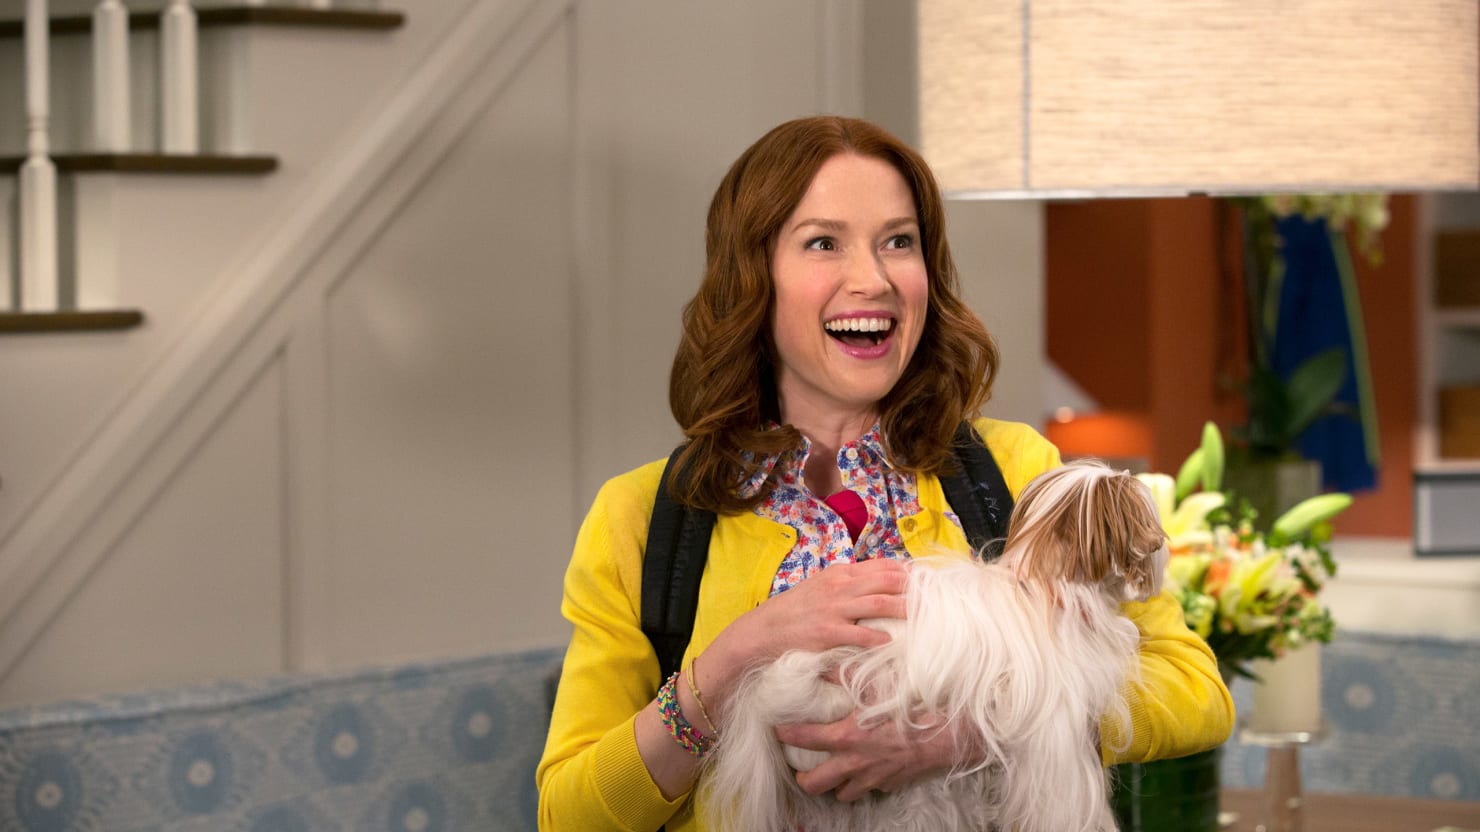 The First Look at Tina Fey’s New Netflix Comedy